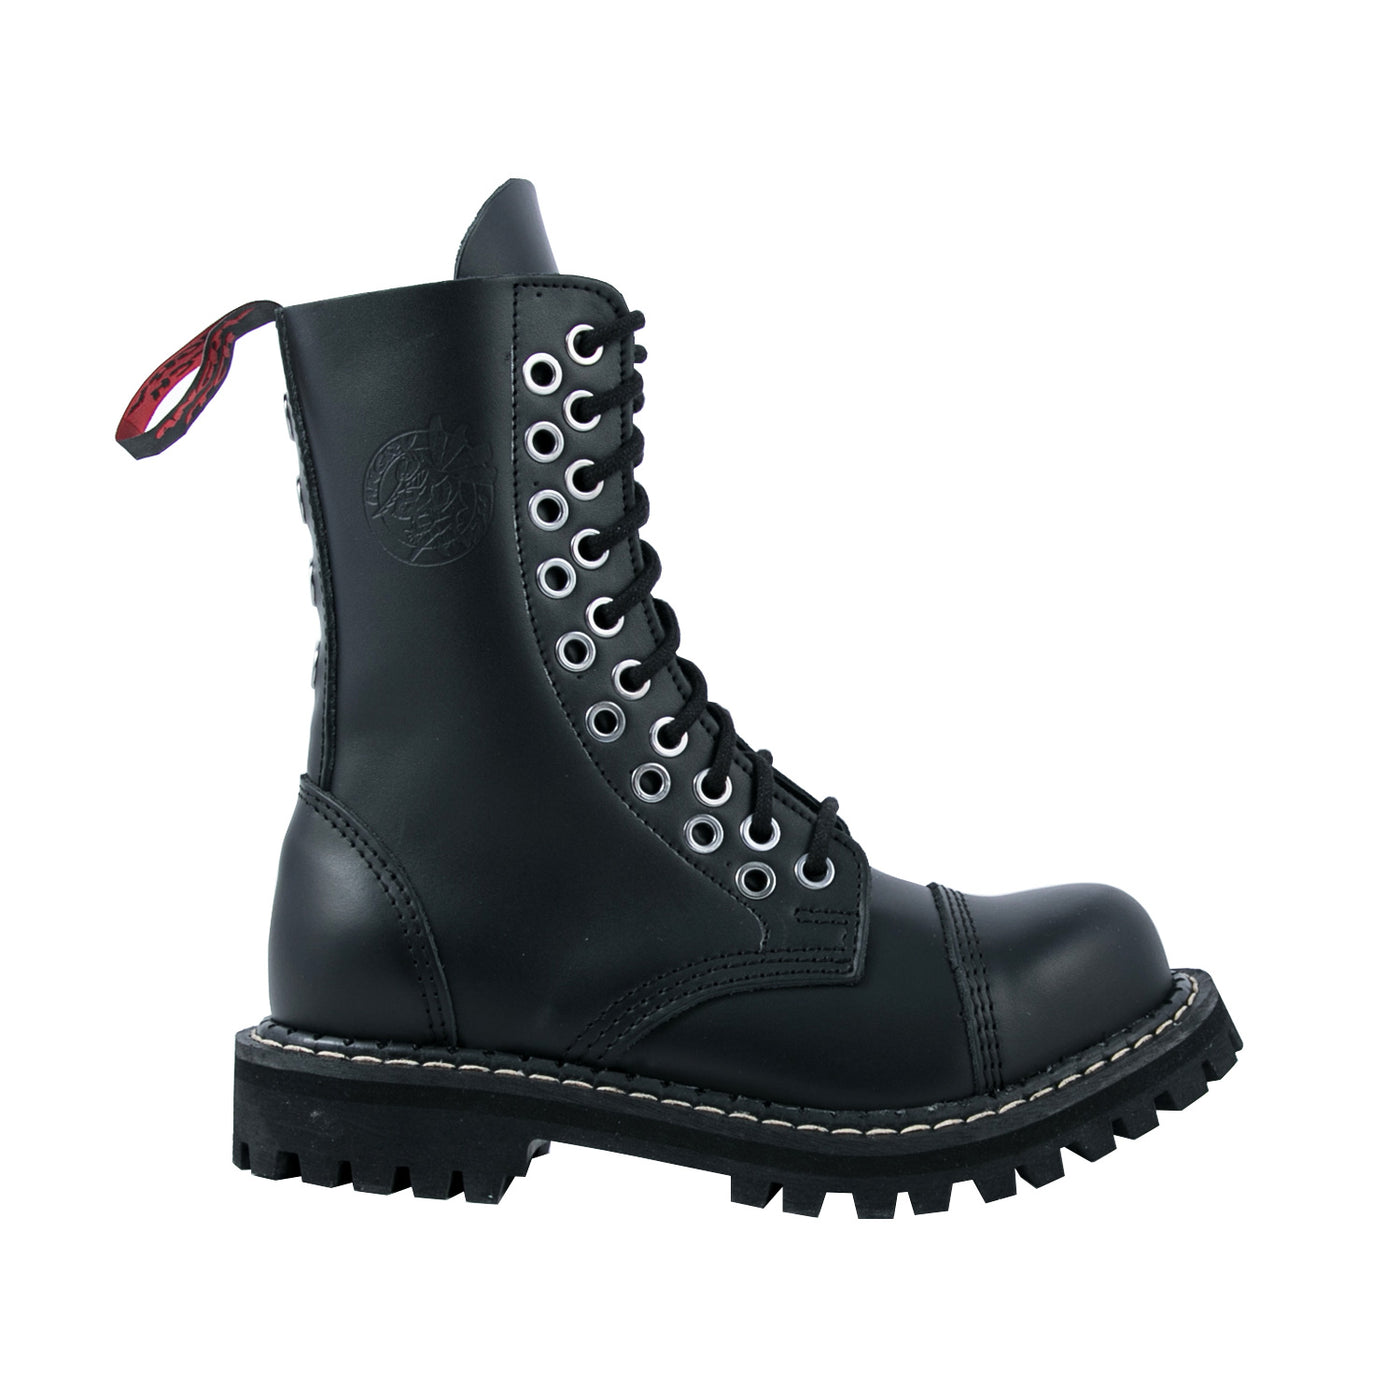 Angry Itch 10 Double Eyelet Boots with Steel Toe Cap Black Leather